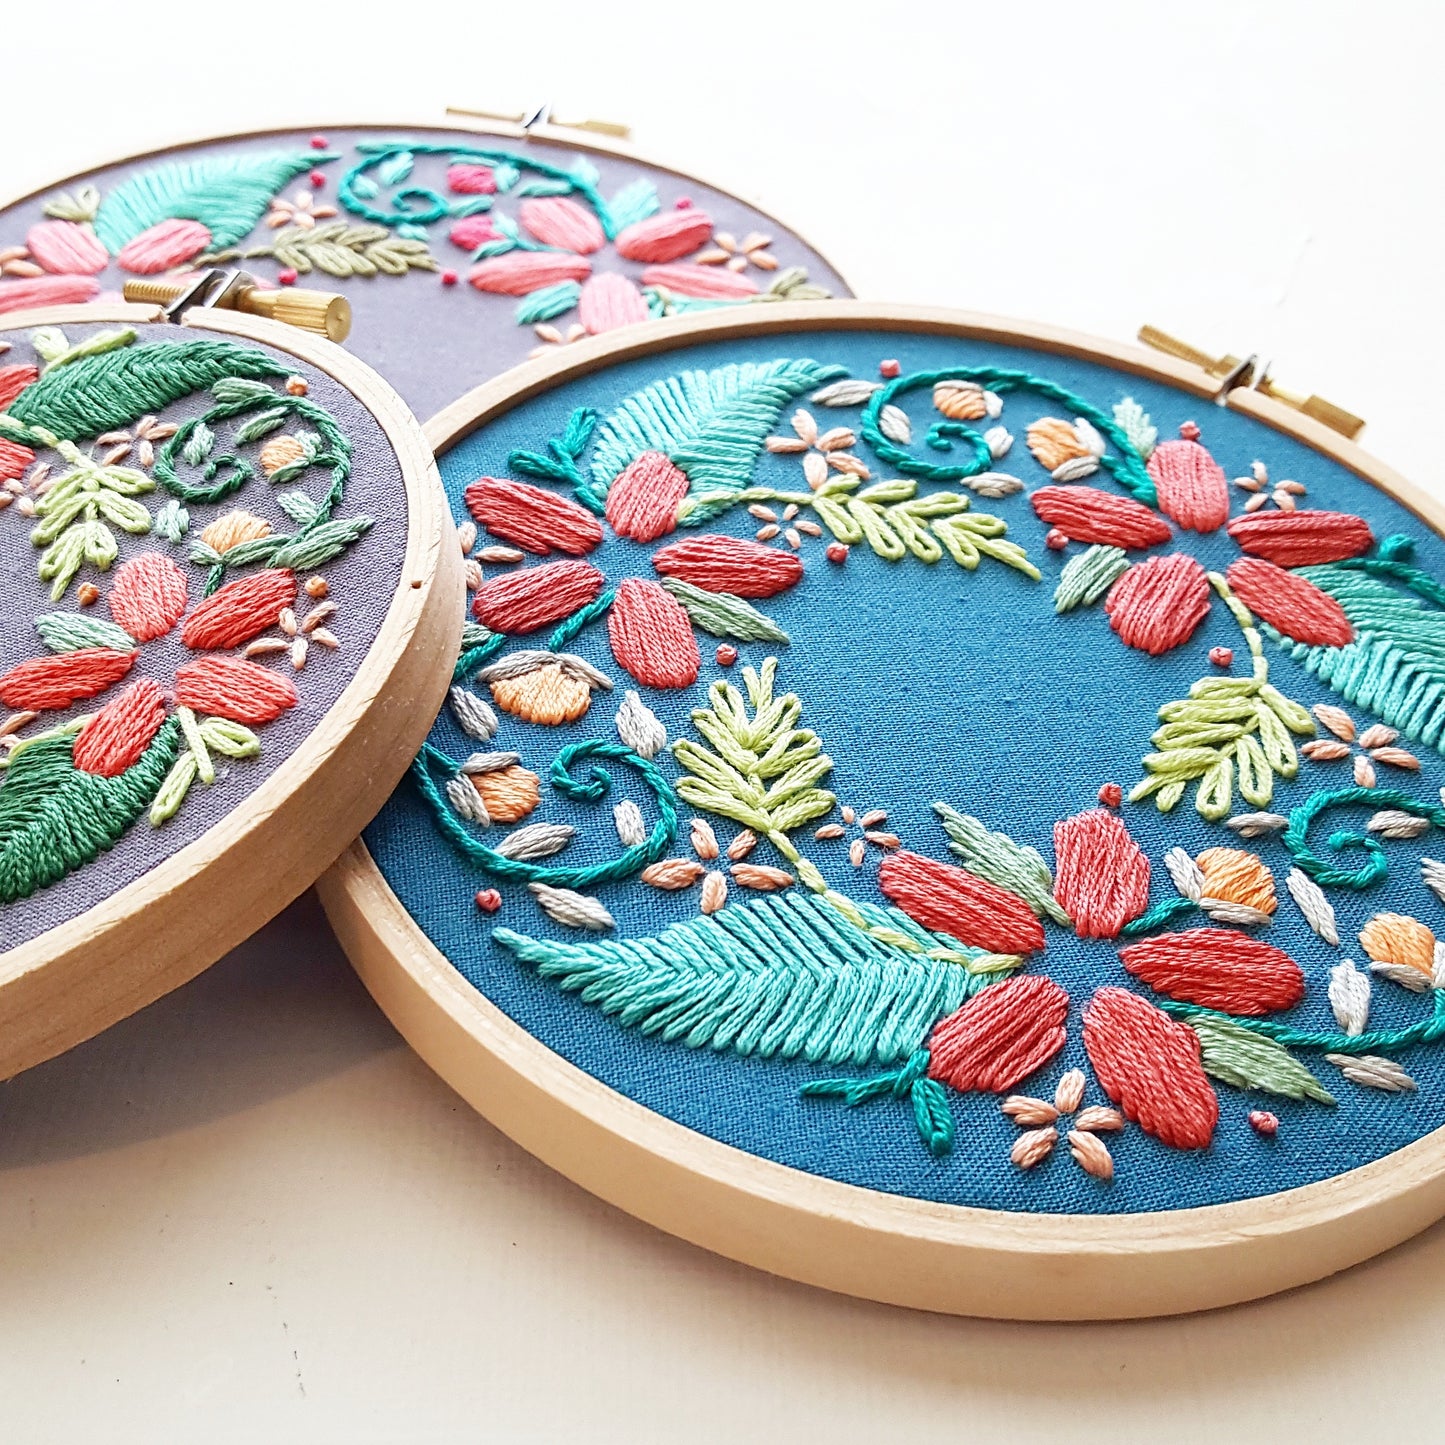 Floral Wreath Beginner Embroidery Pattern (PDF)